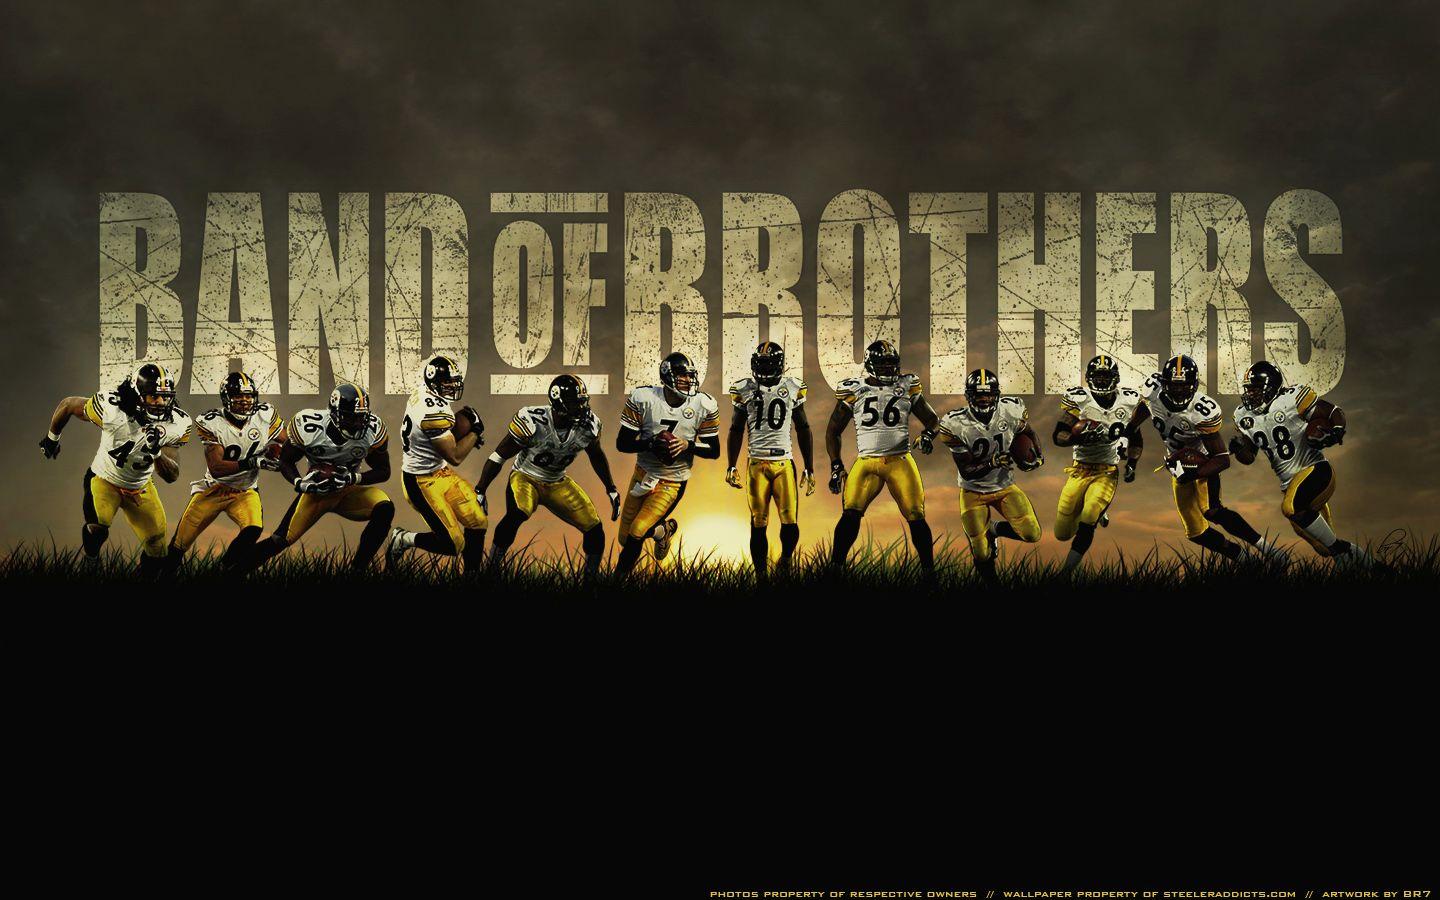 Pittsburgh Steelers Wallpaper.com Image Search. My Team